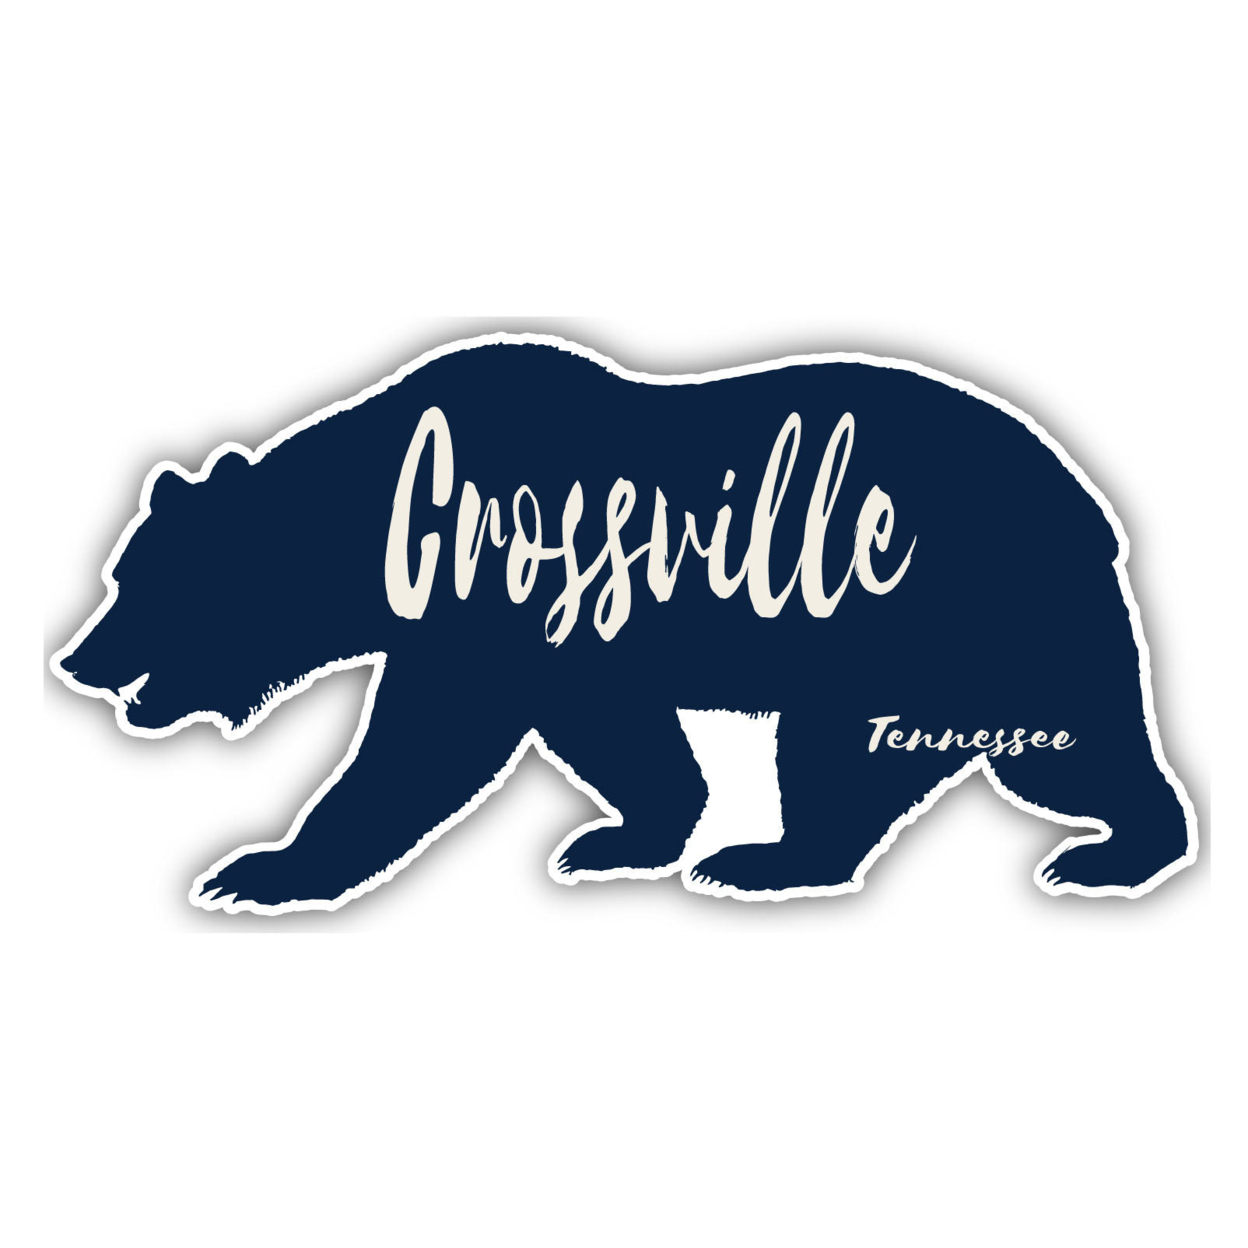 Crossville Tennessee Souvenir Decorative Stickers (Choose Theme And Size) - 4-Pack, 10-Inch, Bear